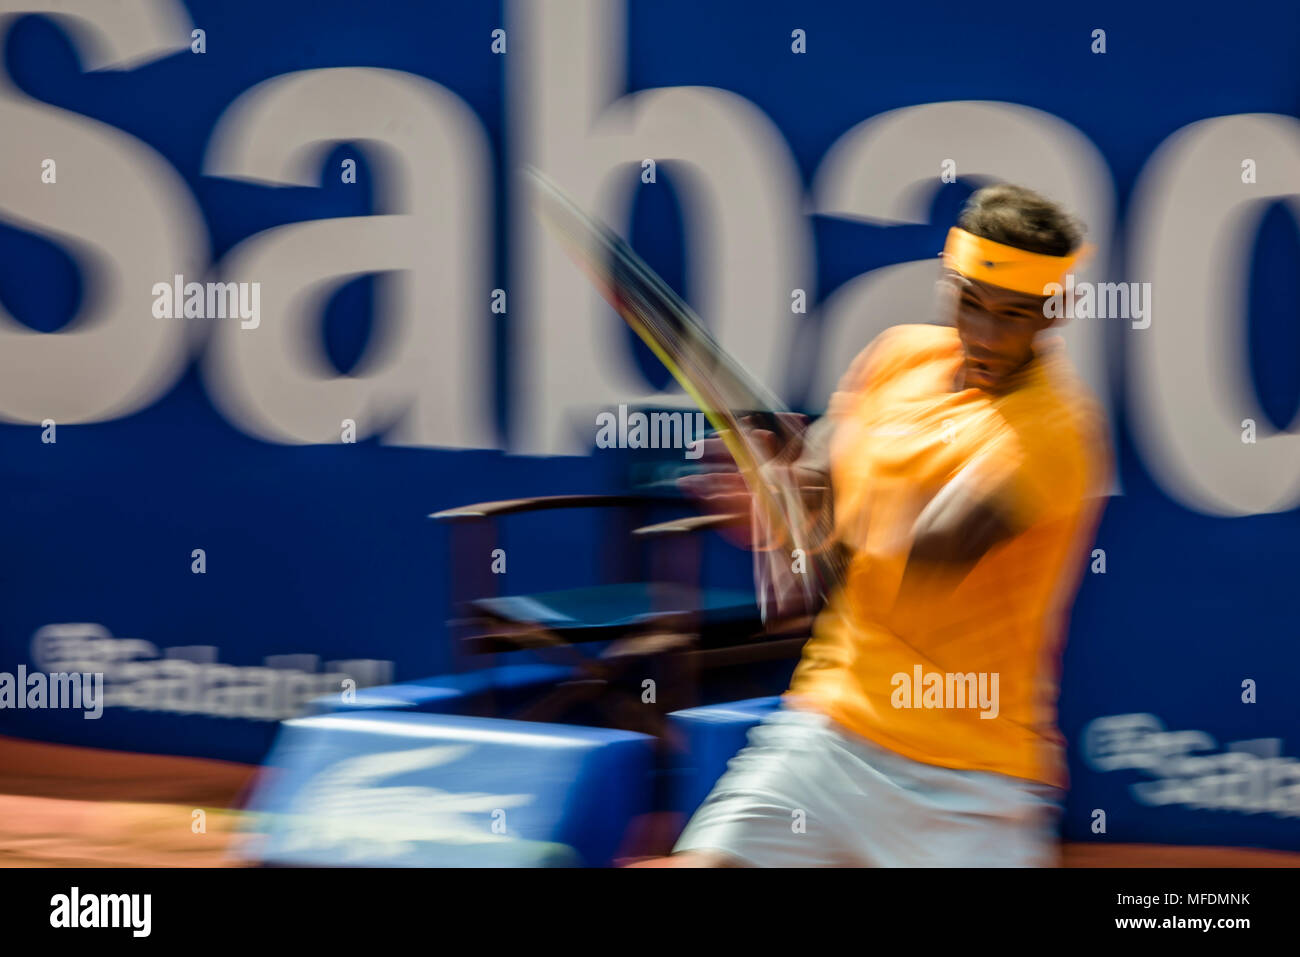 Barcelona, Spain. 25 April, 2018:   RAFAEL NADAL (ESP) returns the ball to Roberto Carballes Baena (ESP) during Day 3 of the 'Barcelona Open Banc Sabadell' 2018. Nadal won 6-4,6-4 Credit: Matthias Oesterle/Alamy Live News Stock Photo